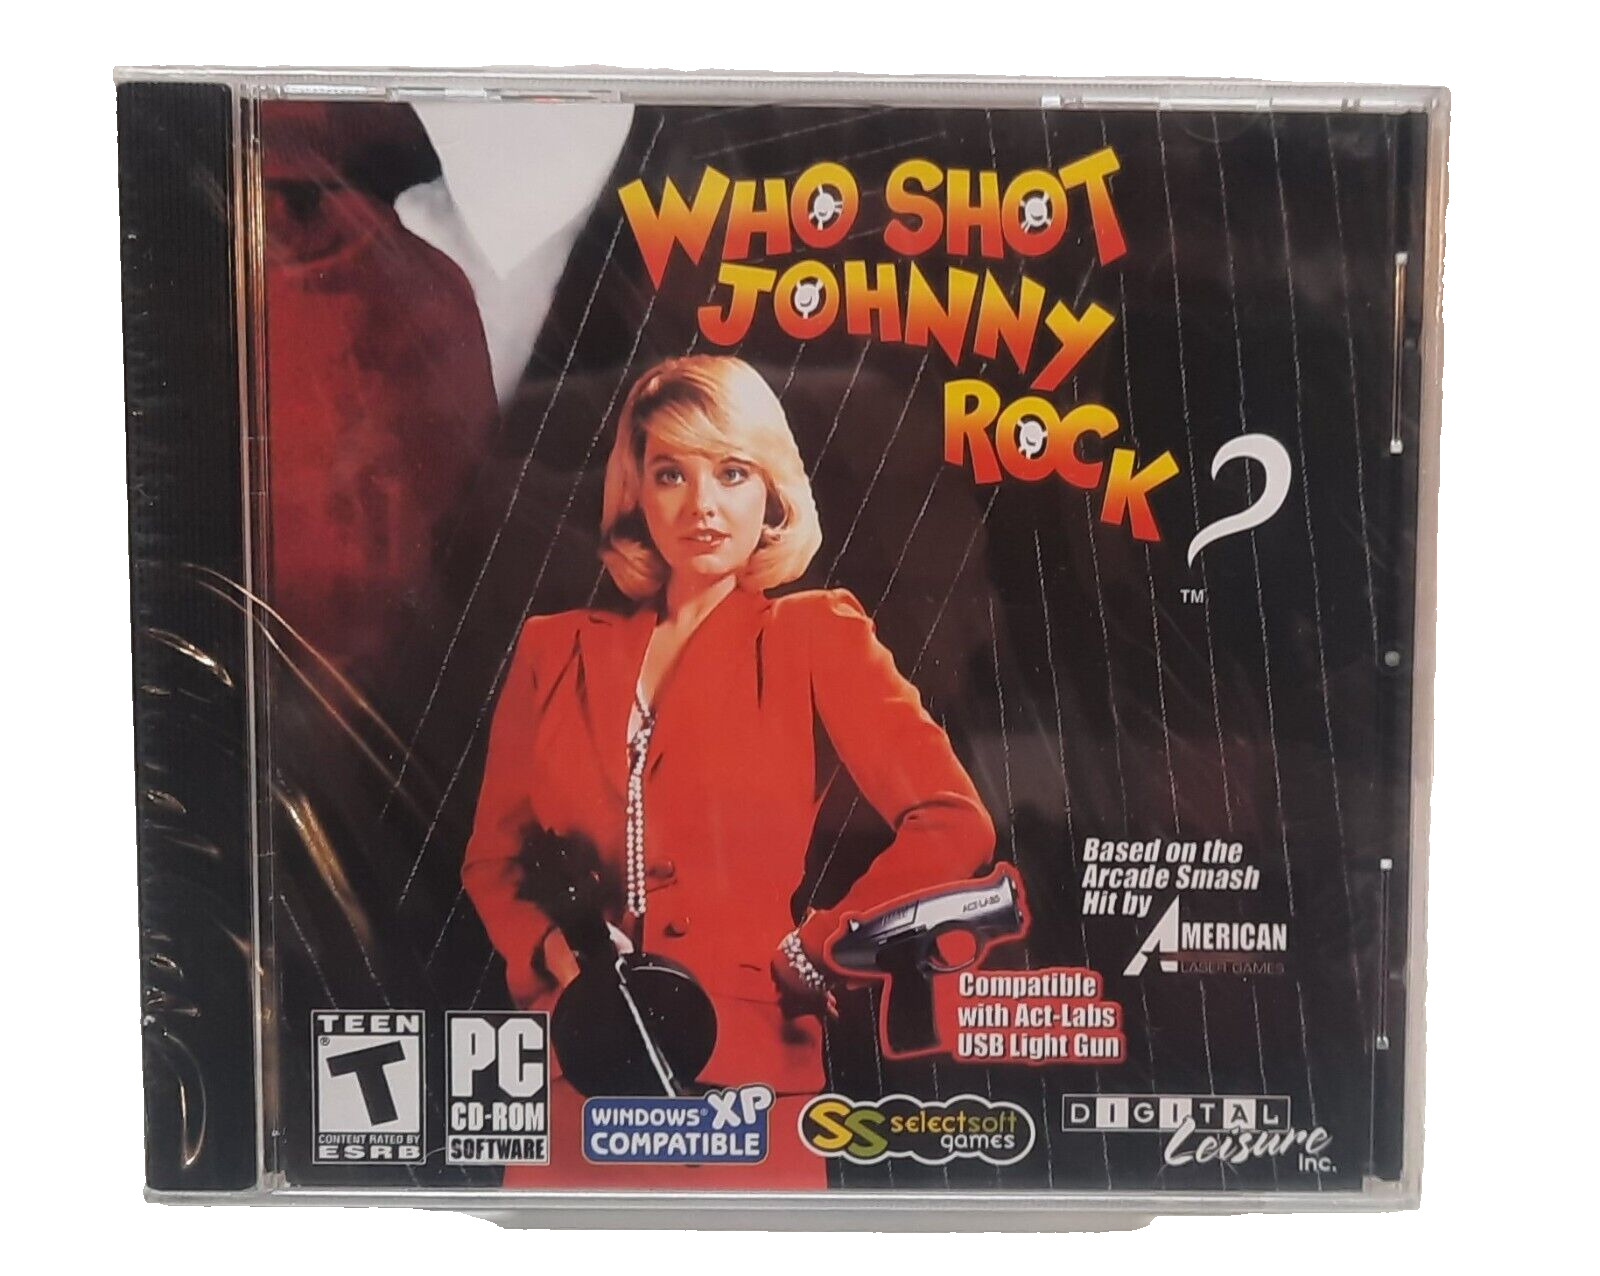 Who Shot Johnny Rock?-Digital Leisure PC CD Rom-American Laser Games-live action